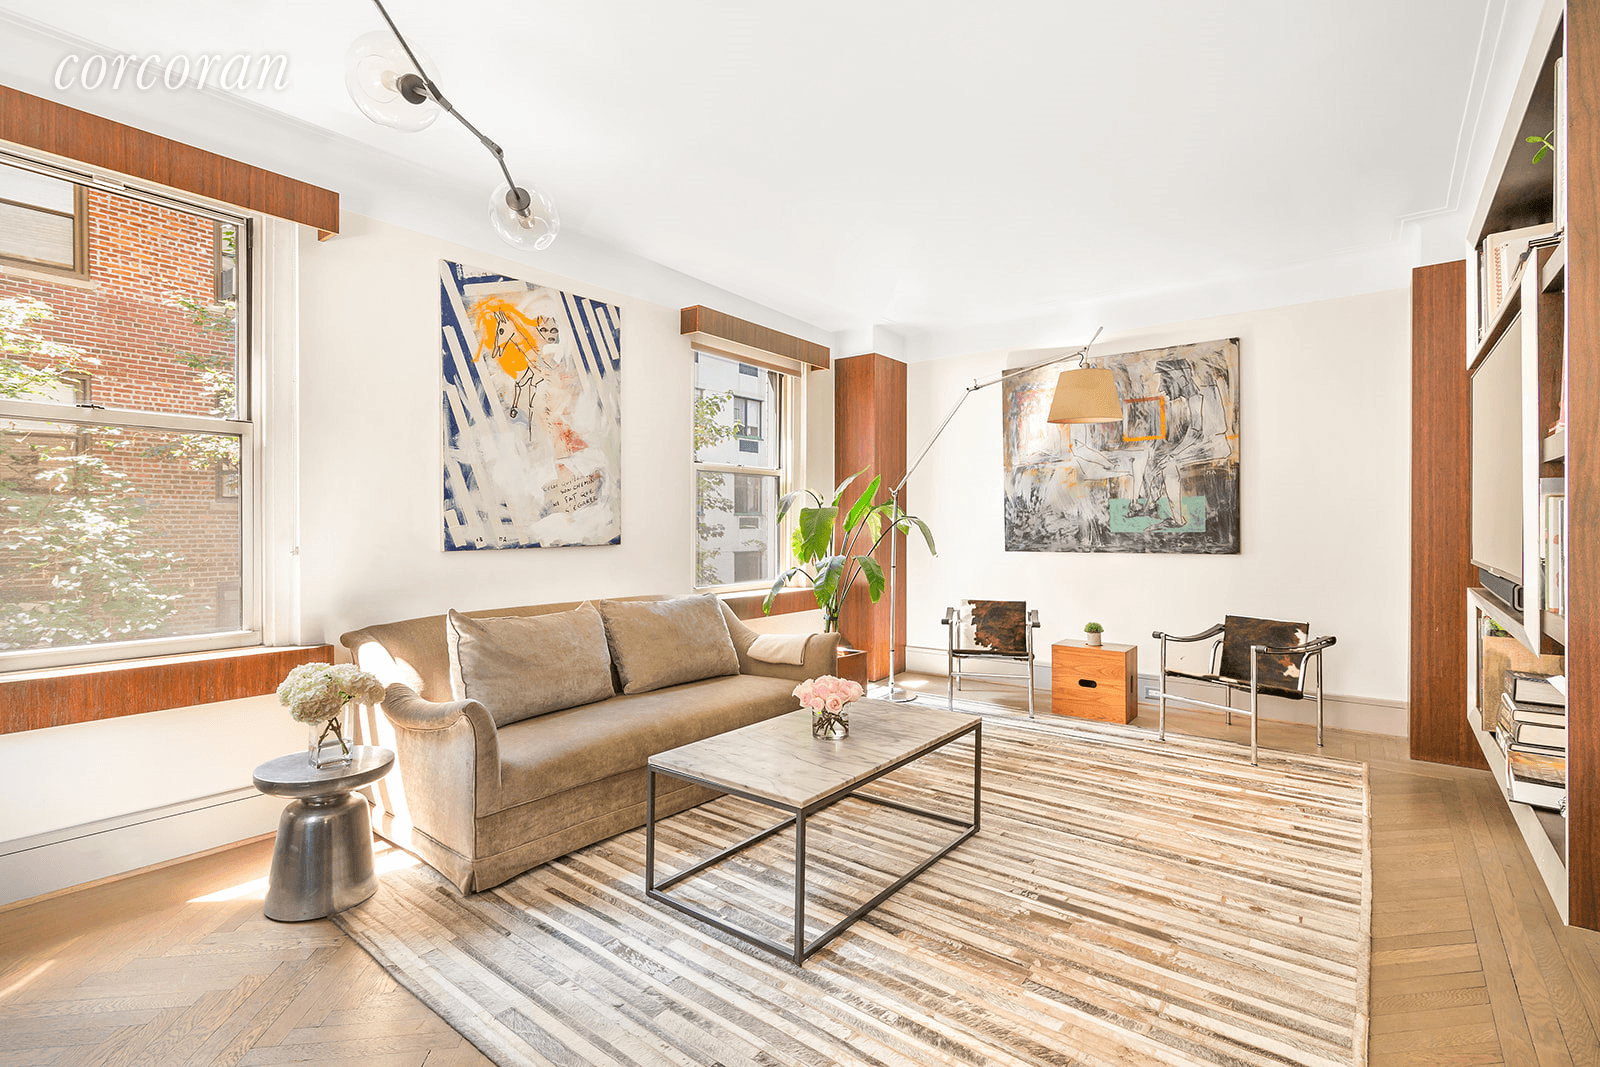 Stunning modern design meets iconic old world New York in this 2 bedroom, 2 bath work of art at the prestigious 39 Plaza Street West in North Park Slope.